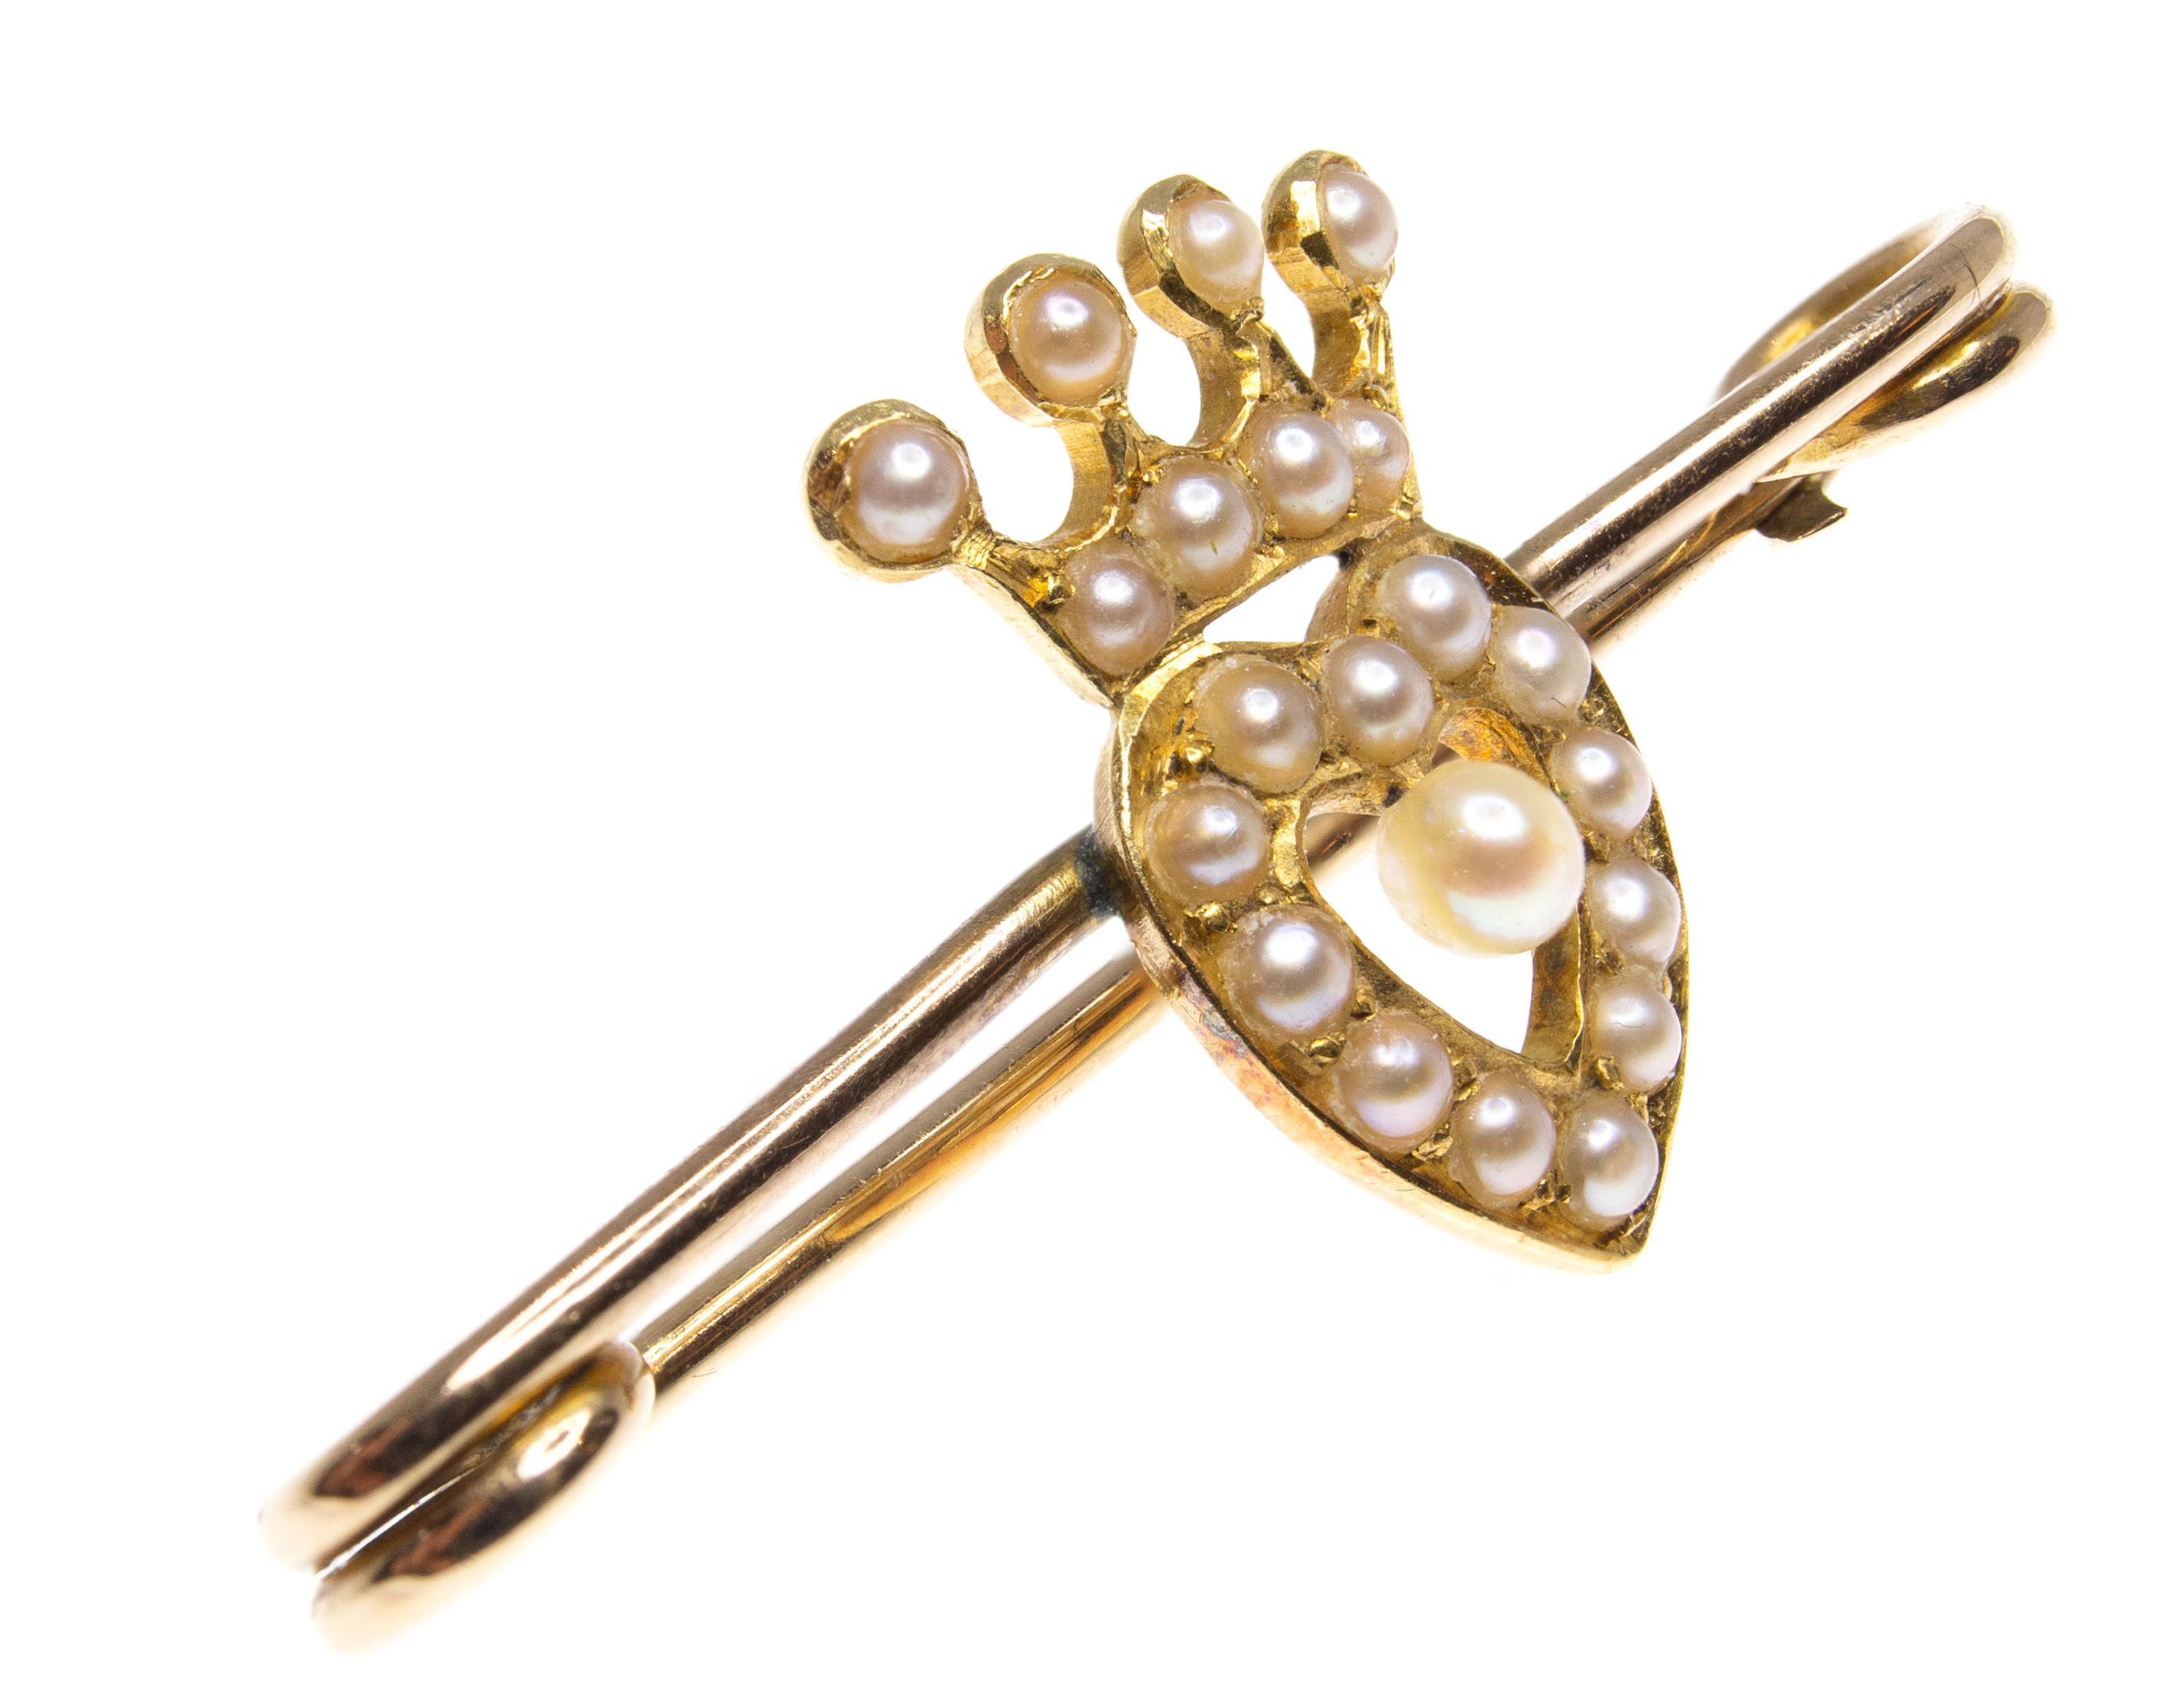 Gold & Seed Pearl Heart & Coronet Pin Brooch - Image 2 of 5